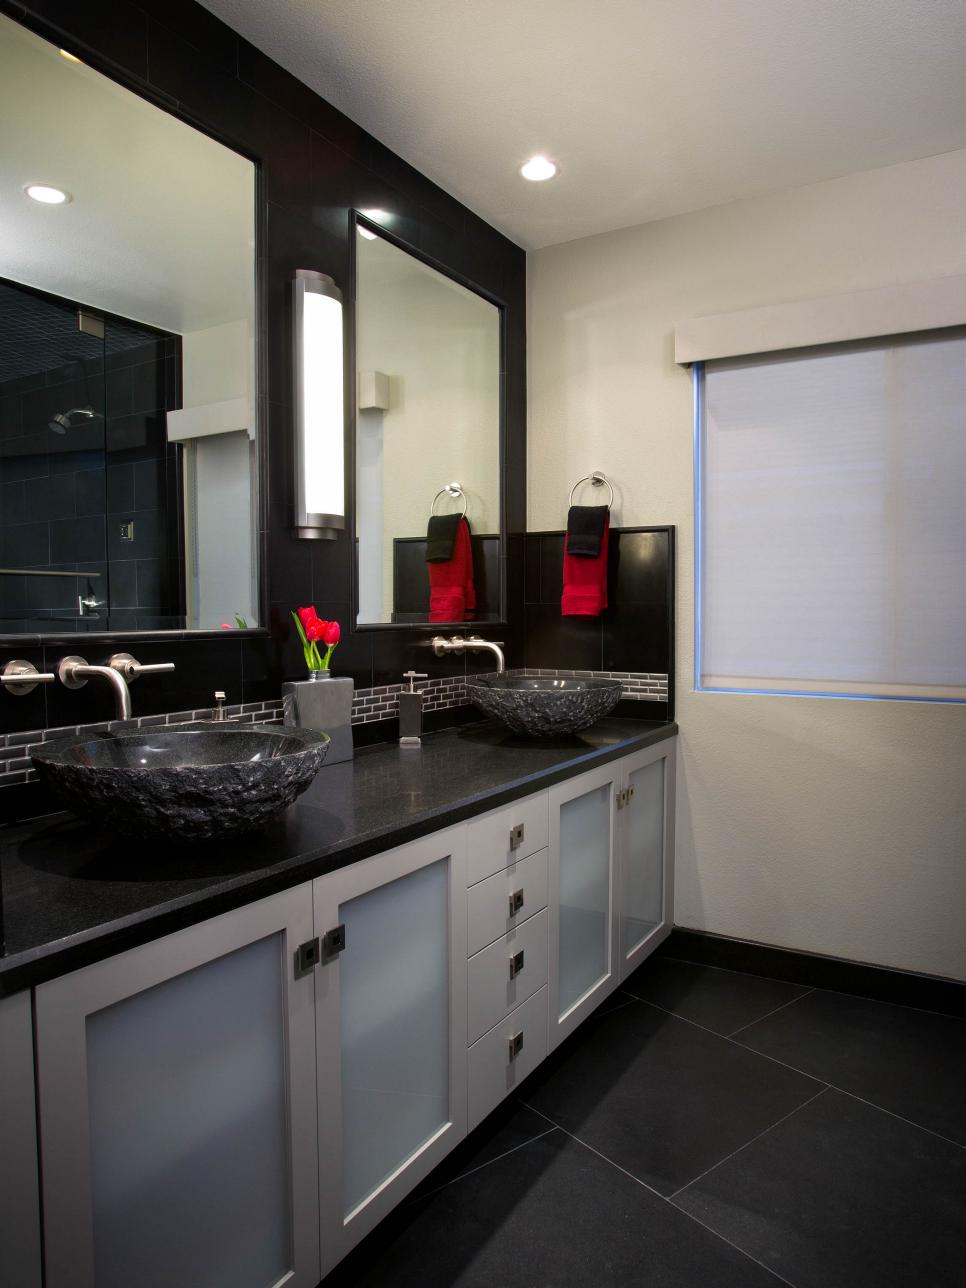 Black and White Bathroom With Double Vanity with Vessel Sinks